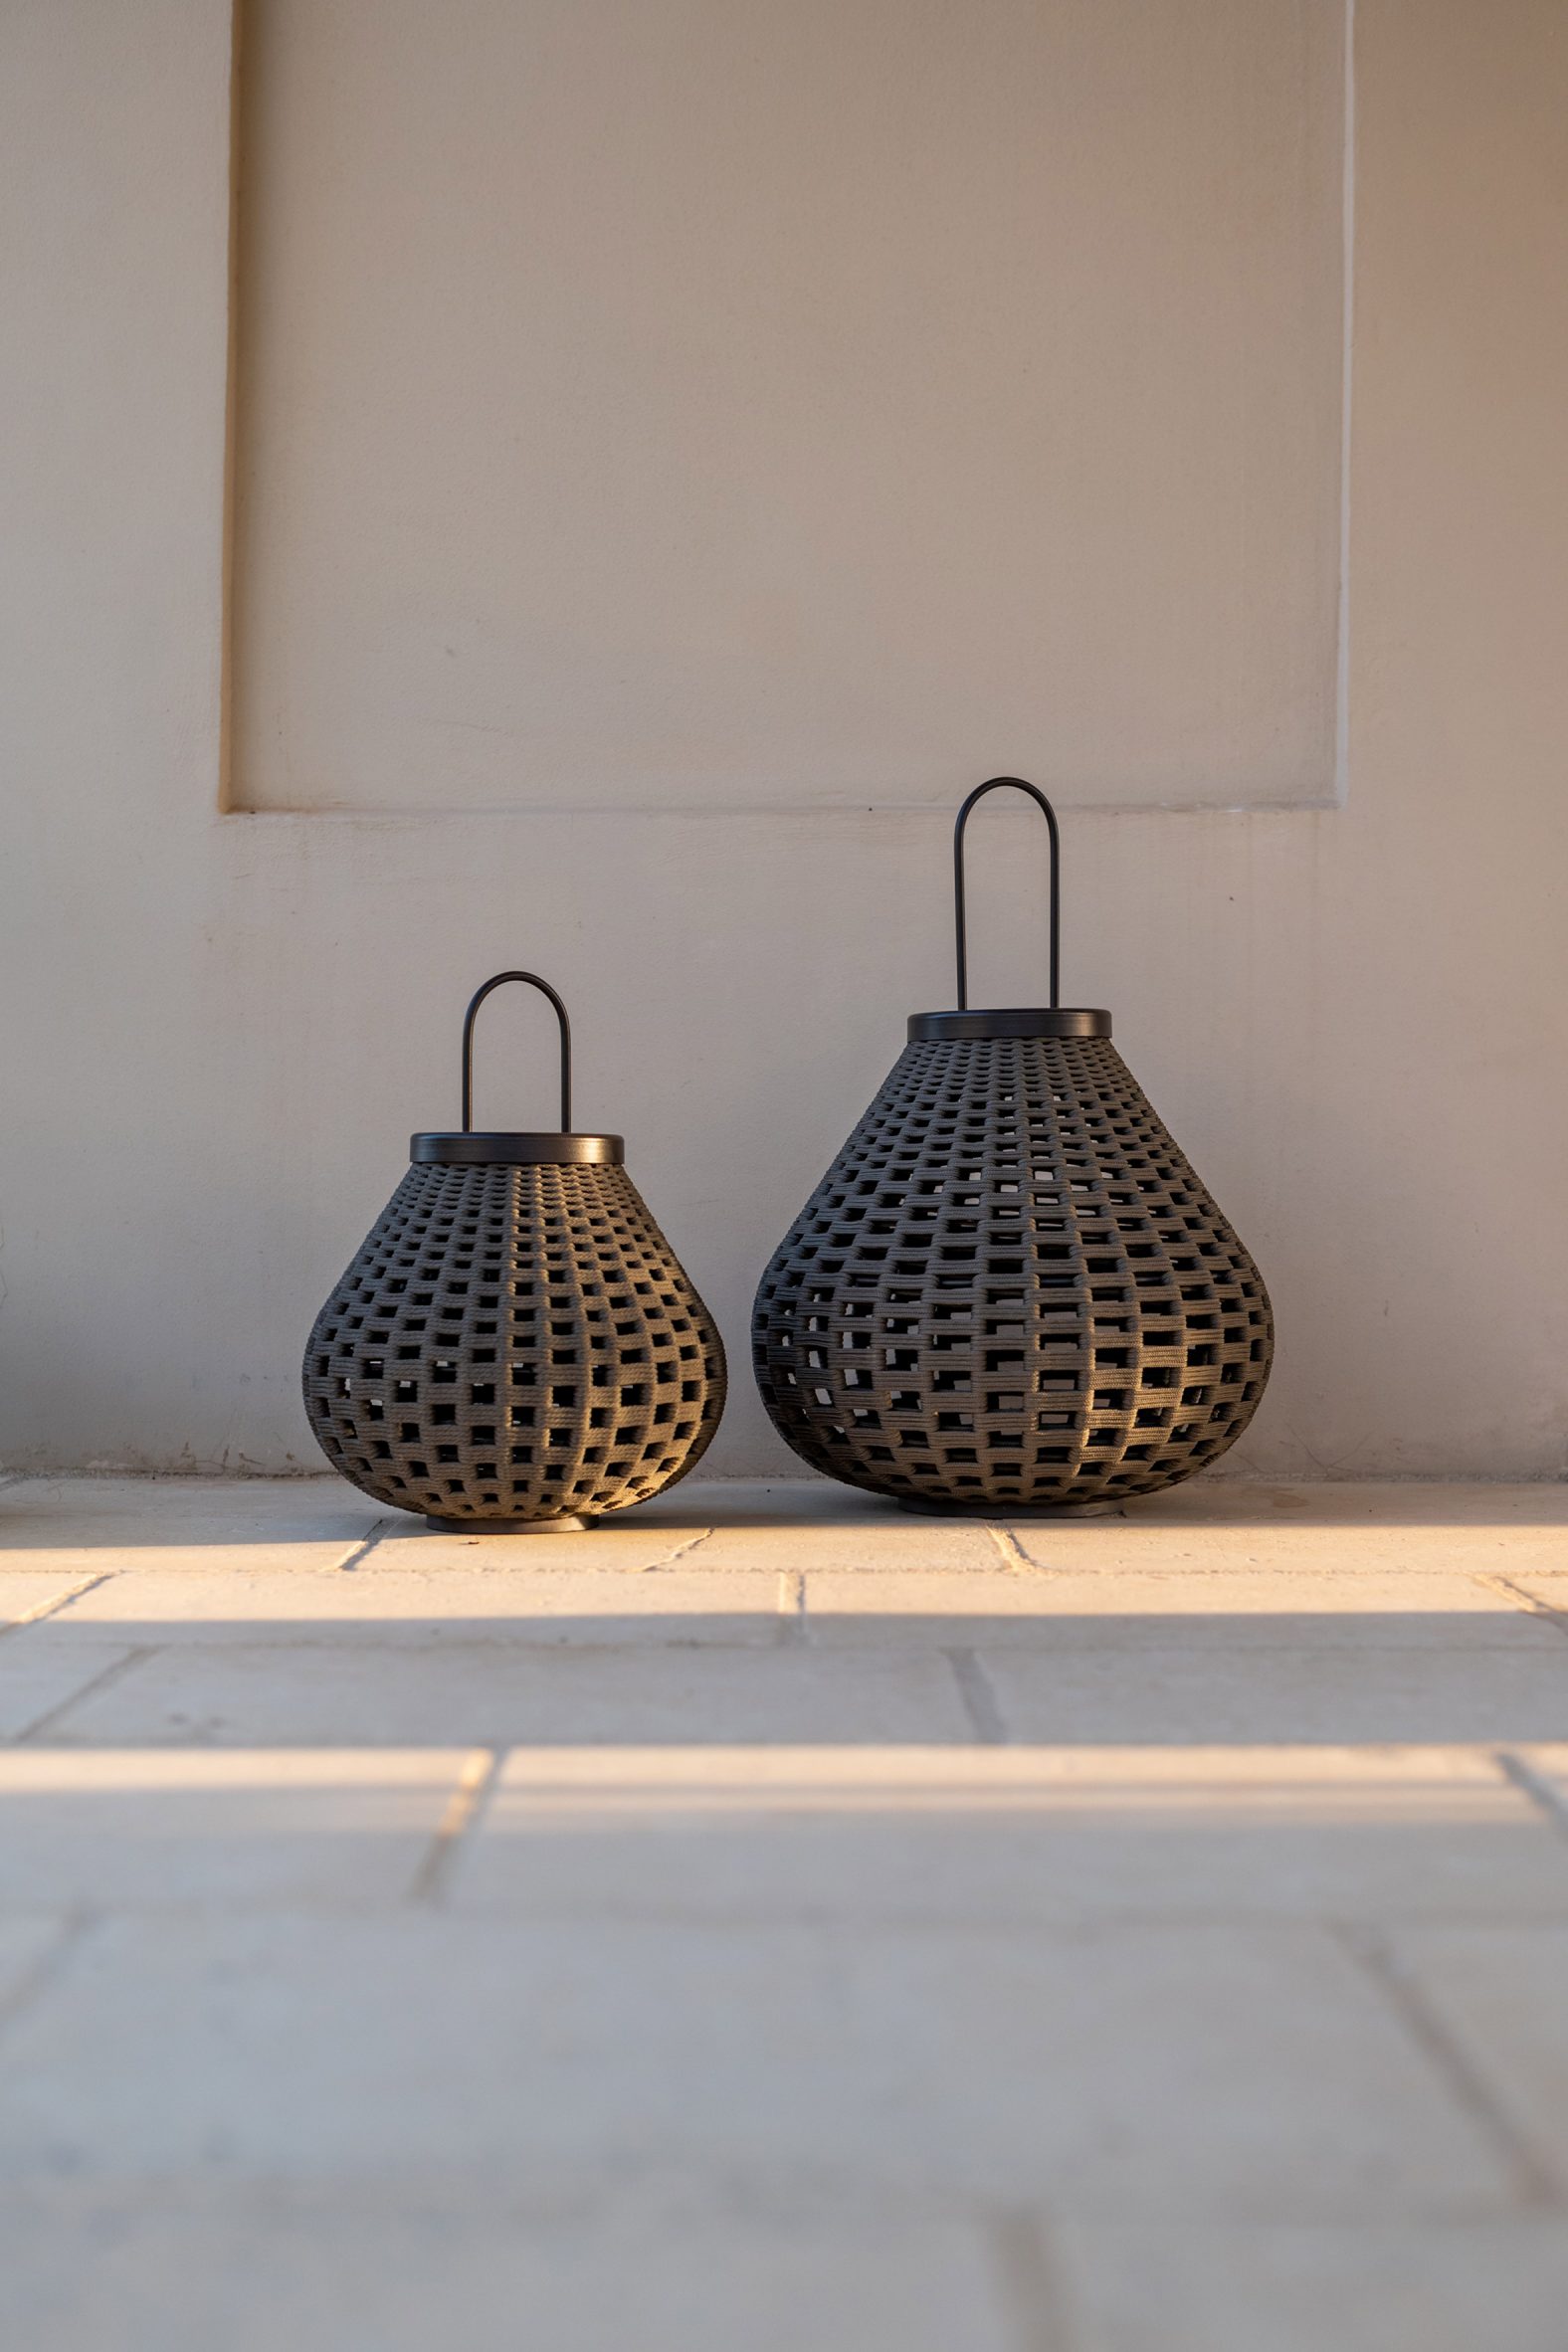 Two black pear-shaped lamps